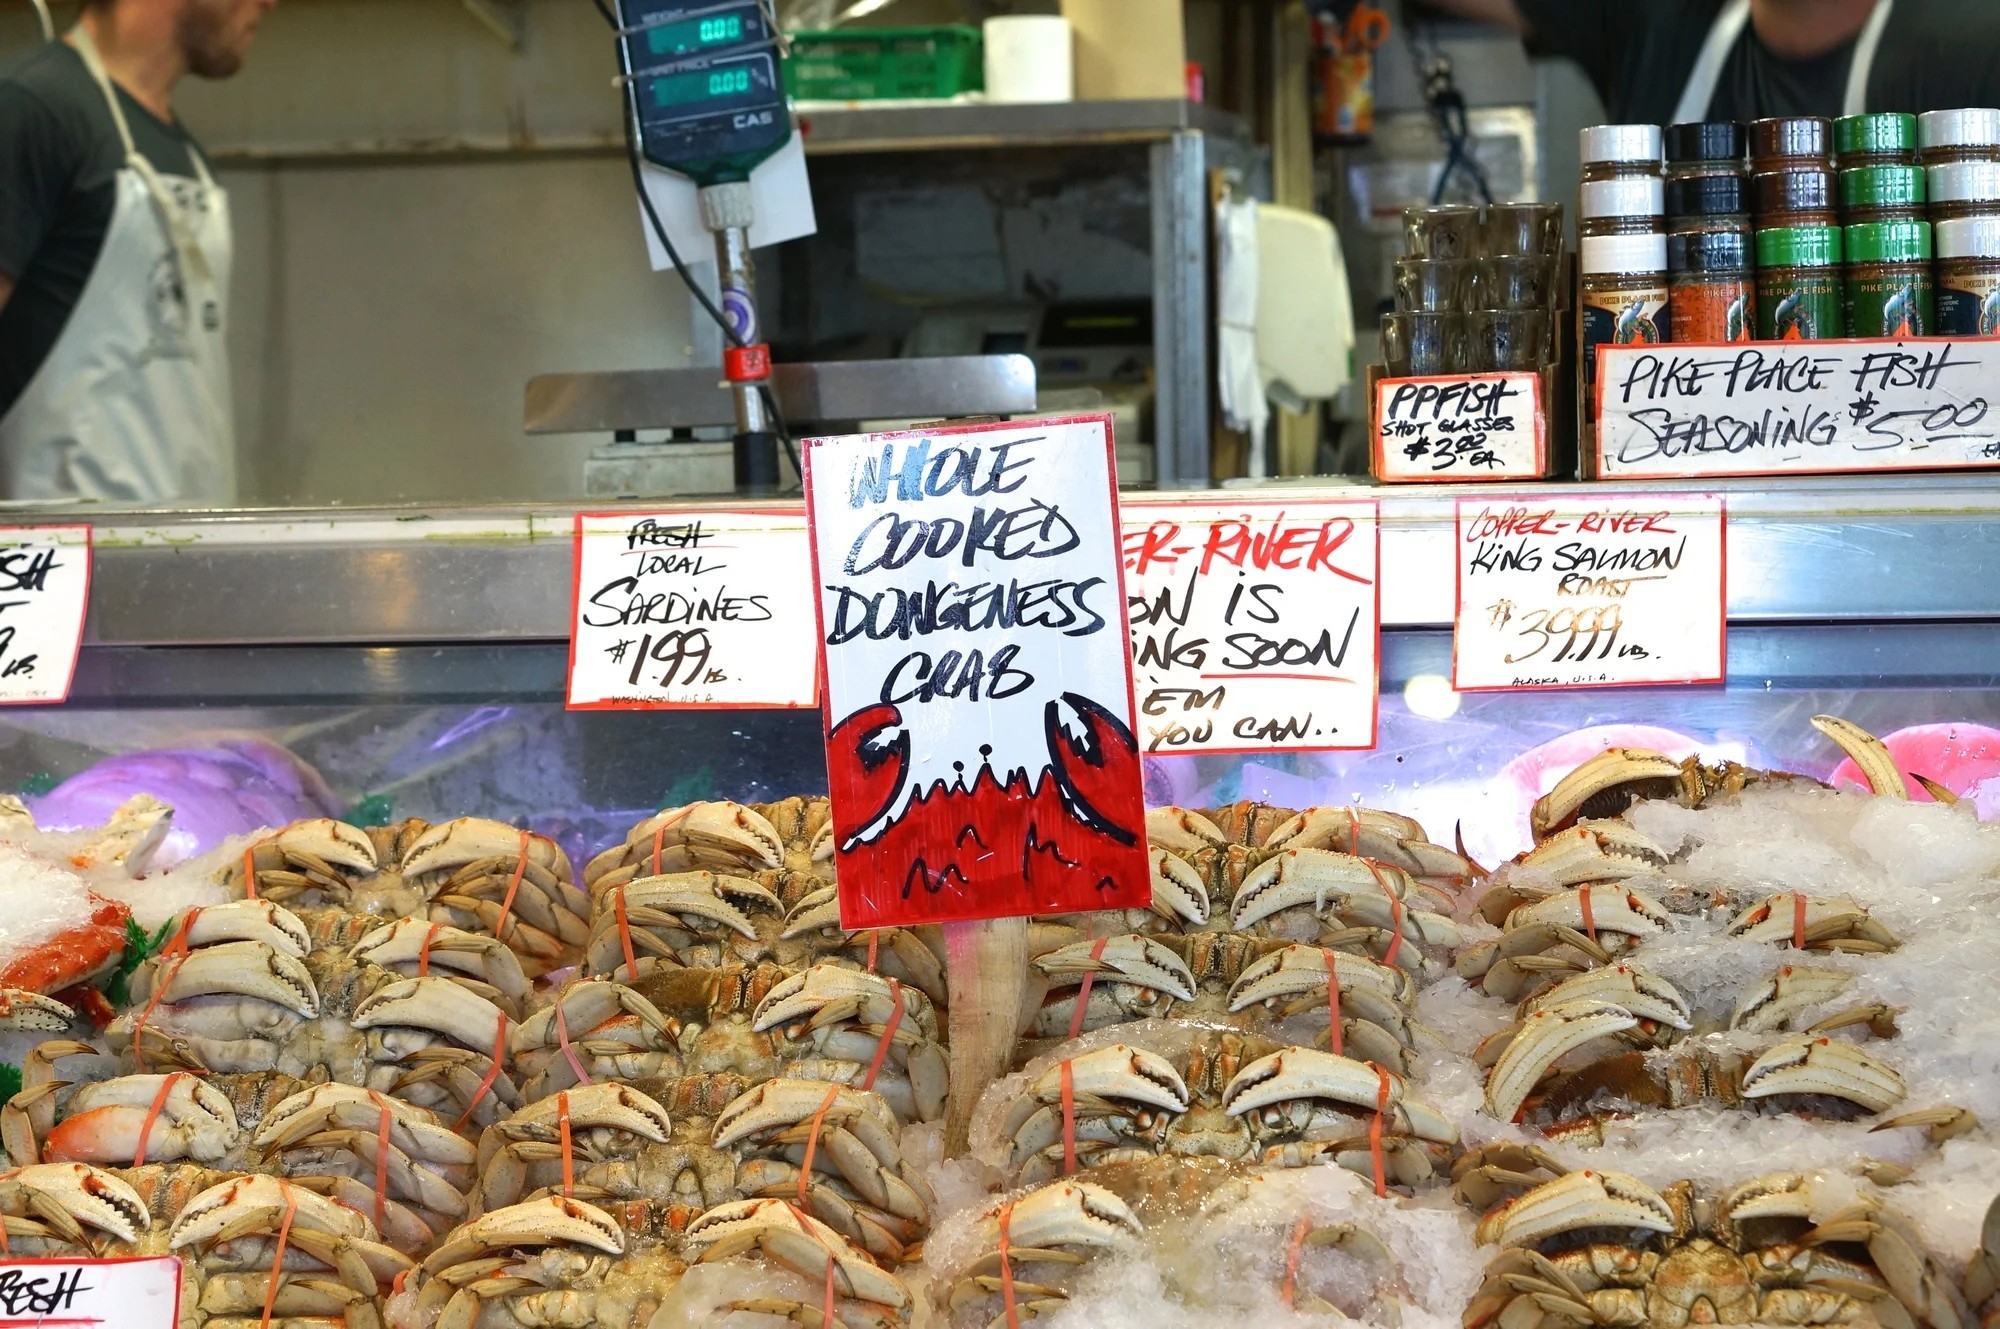 Sweet whole dungeness crabs pike place market